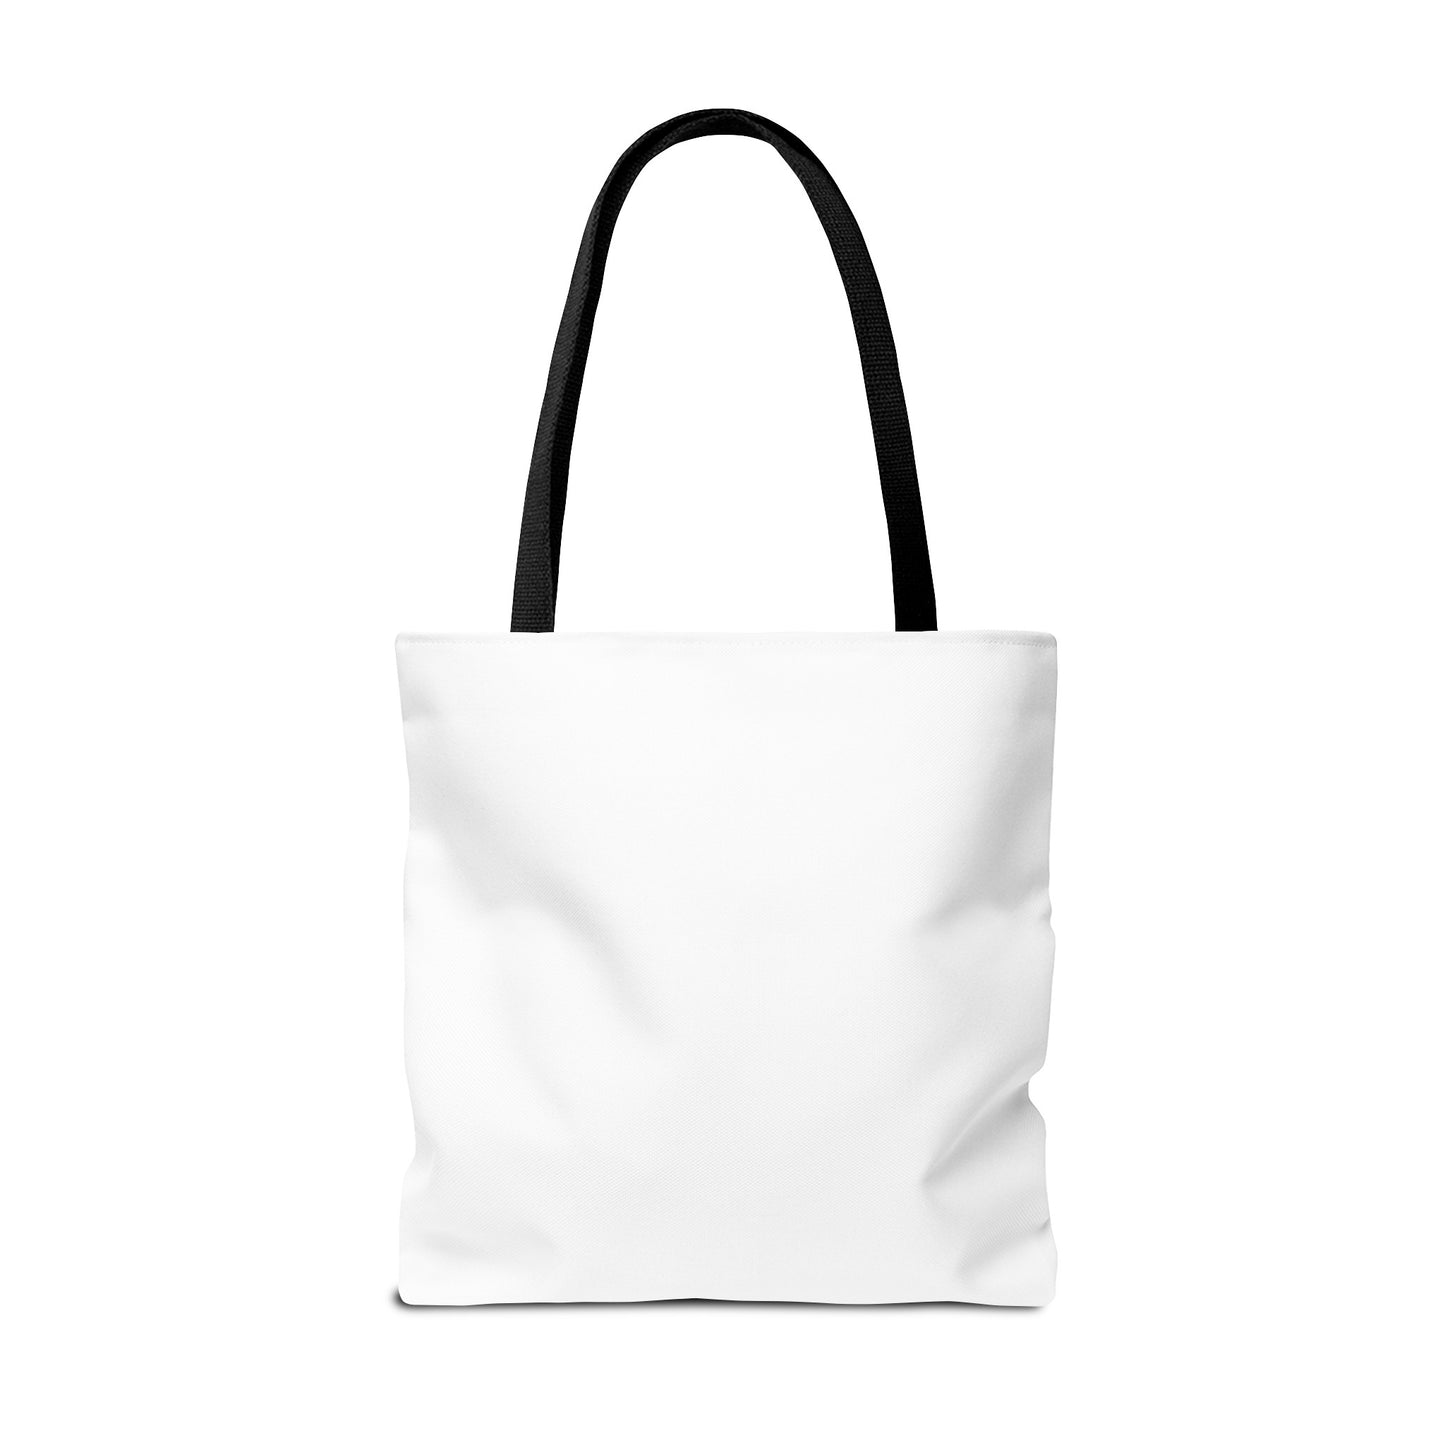 B.S.- Tote Bags with Bachelor of Science Credentials